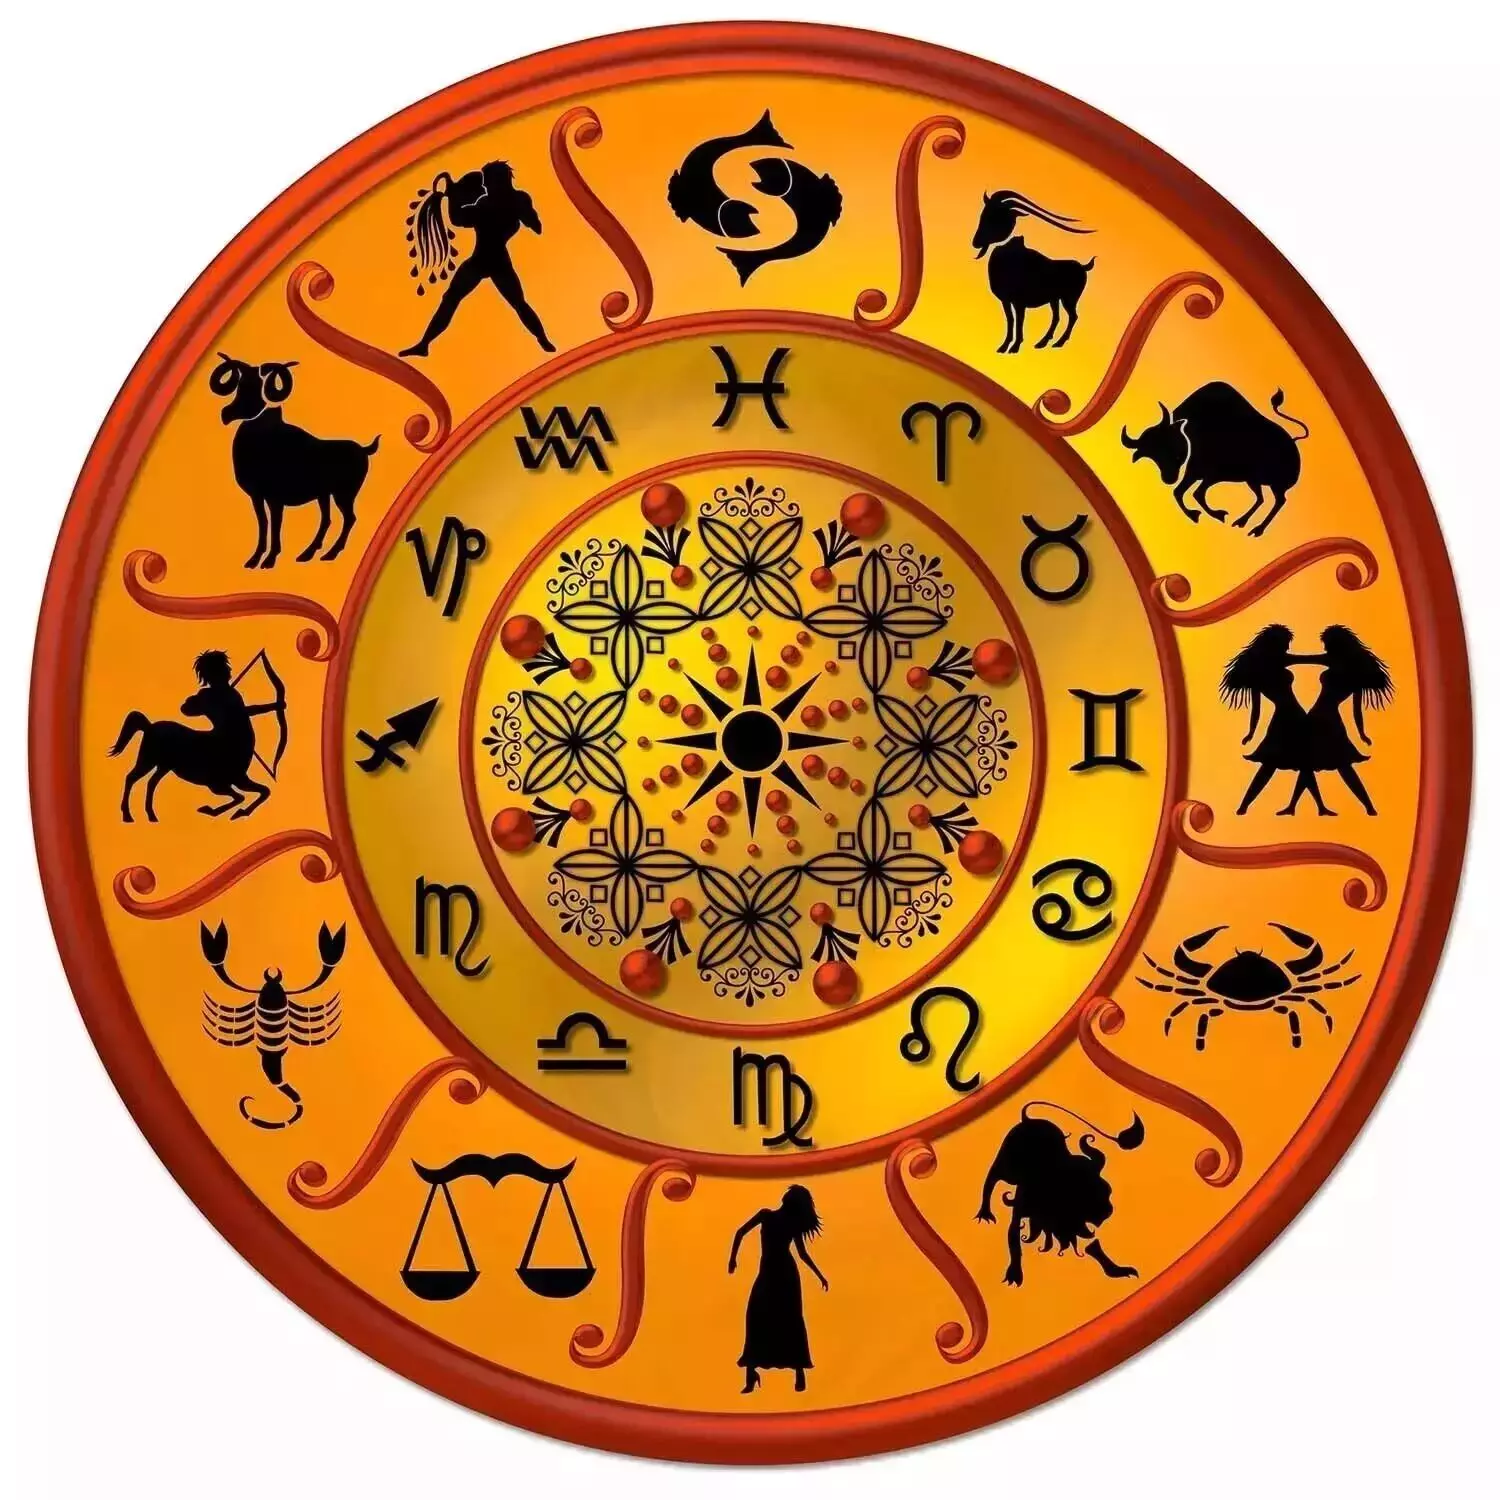 16 September – Know your todays horoscope